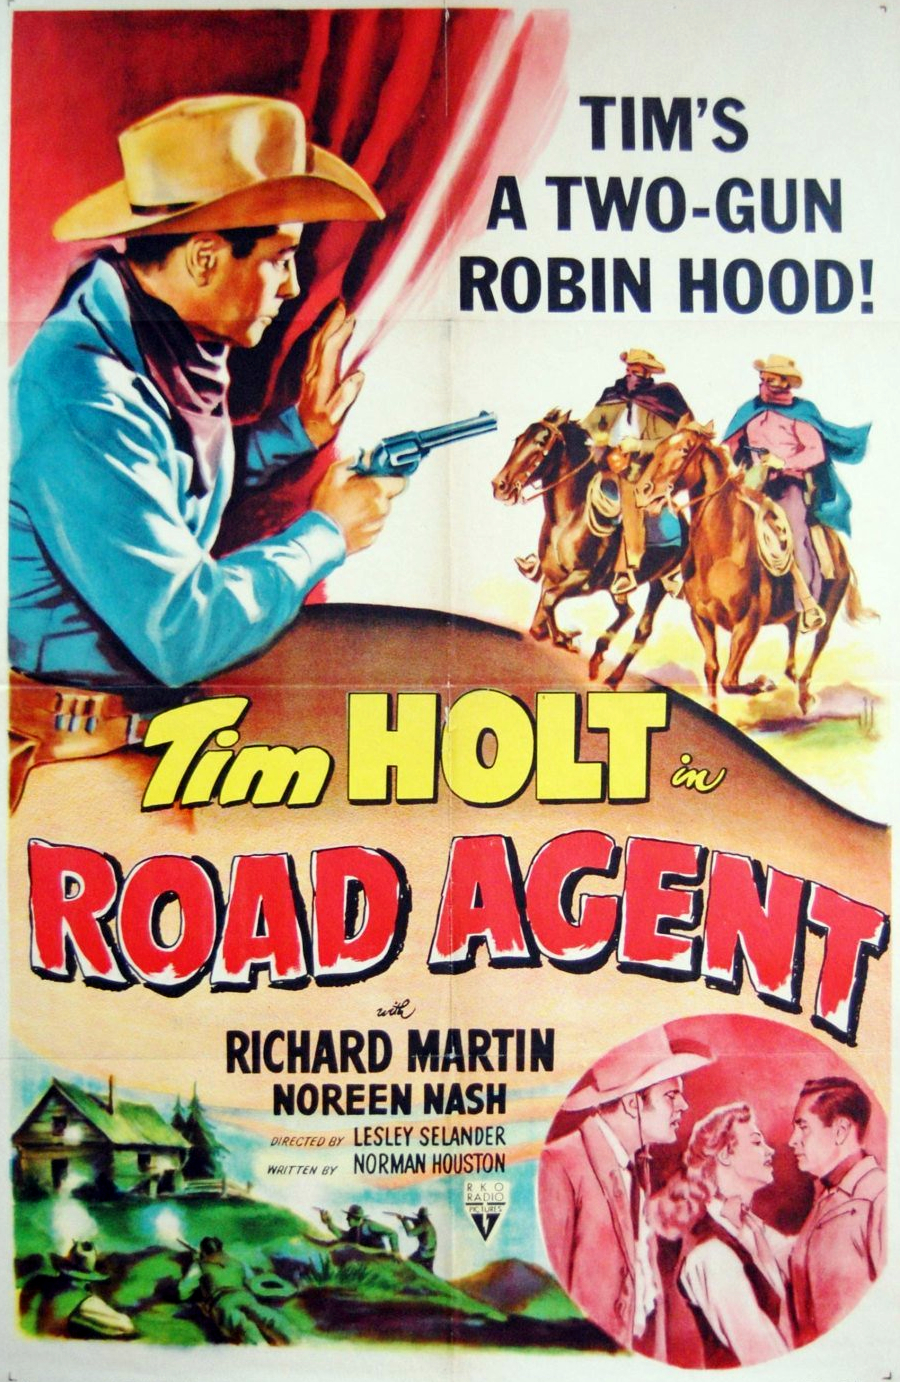 Tim Holt, Richard Martin and Noreen Nash in Road Agent (1952)